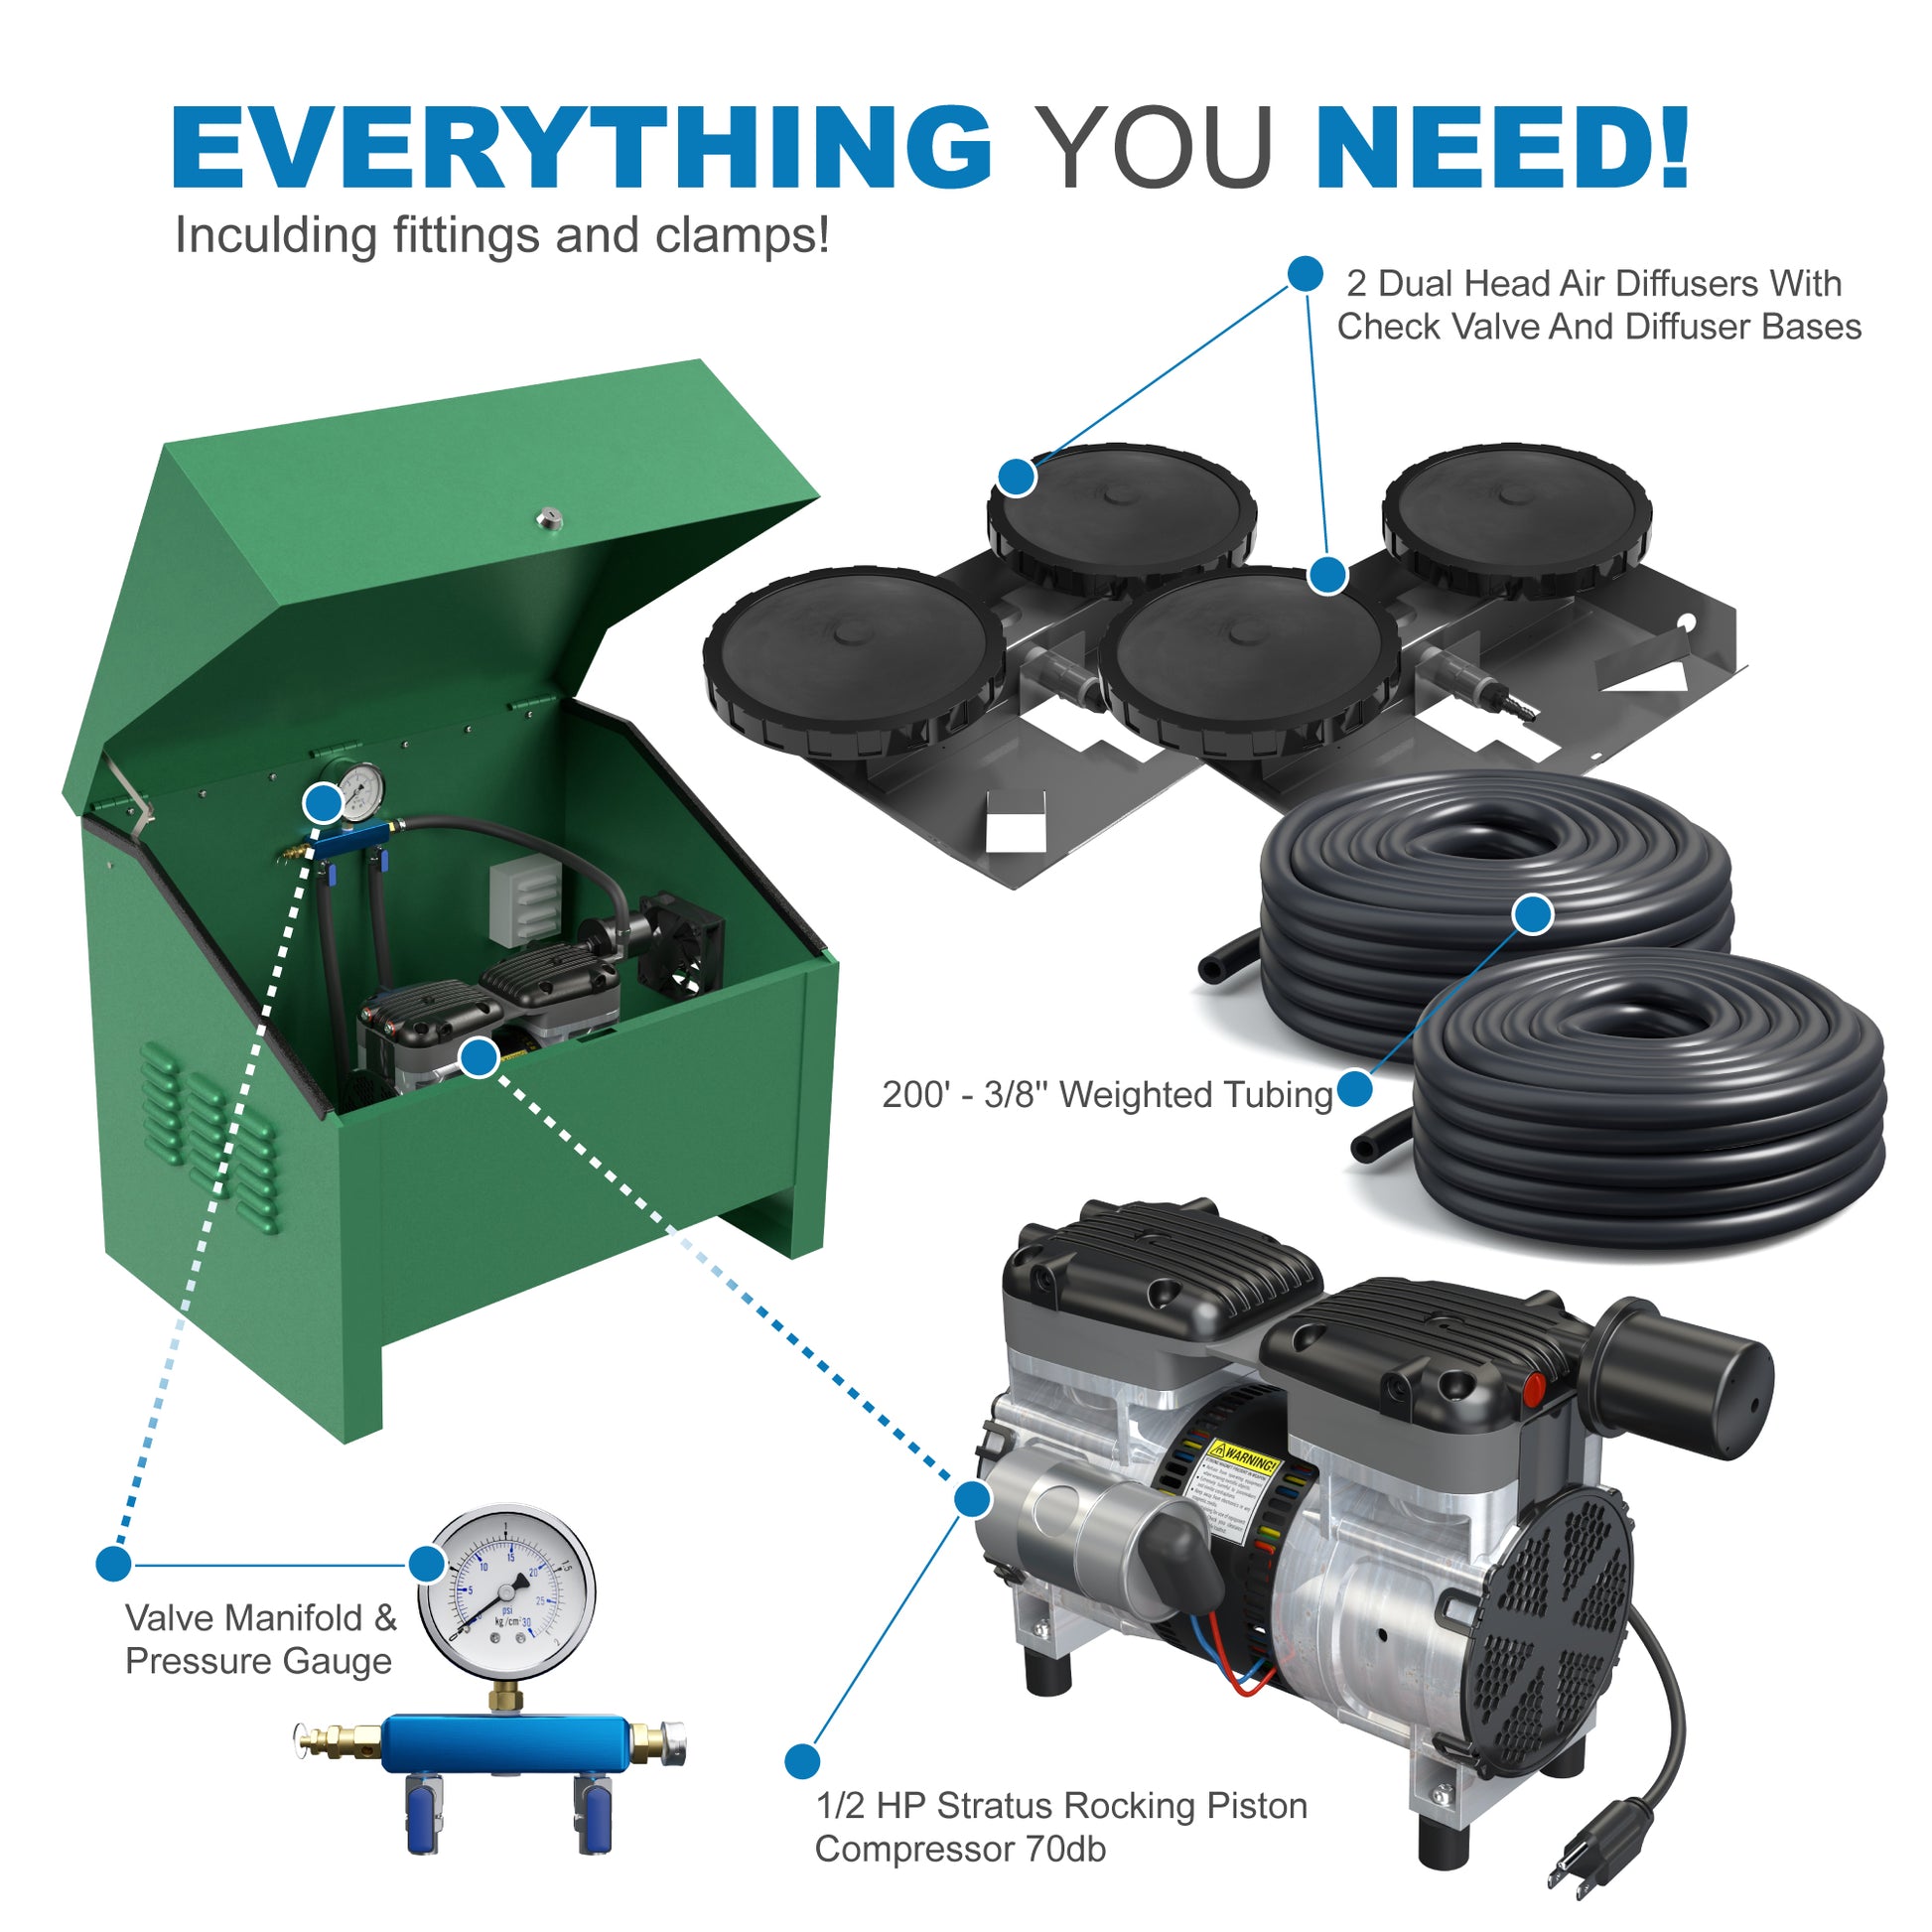 AirPro Deluxe Pond Aerator Kit - up to 2 Acre Ponds - Living Water Aeration